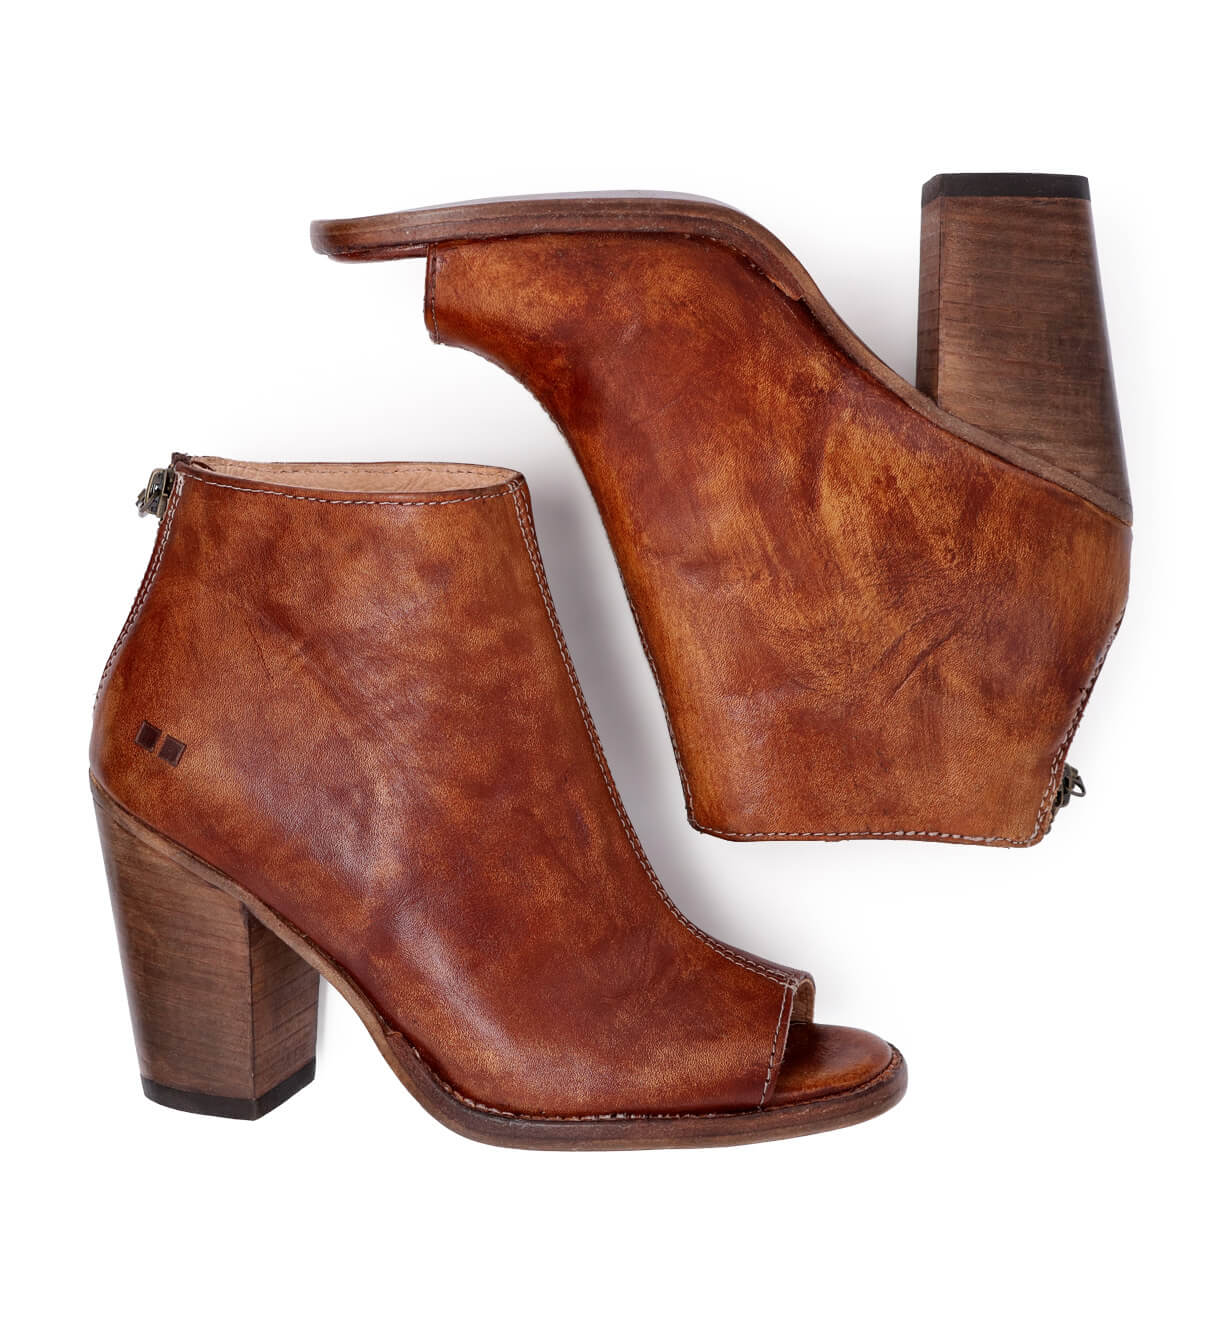 A pair of Onset brown leather ankle boots with a wooden heel by Bed Stu.